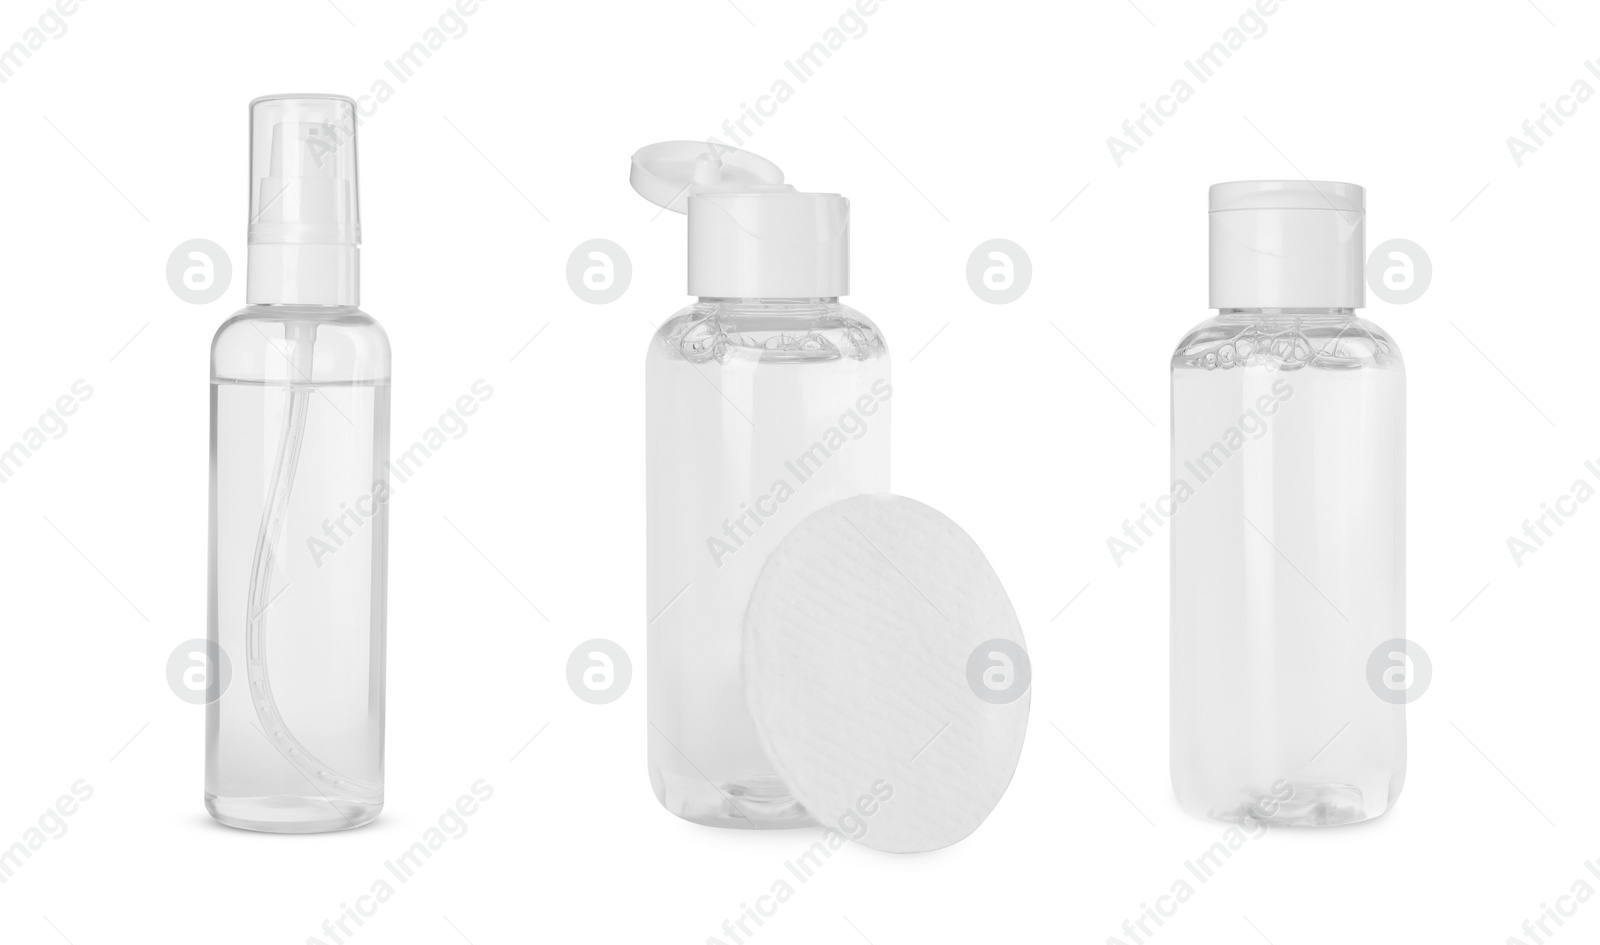 Image of Set with bottles of micellar cleansing water on white background